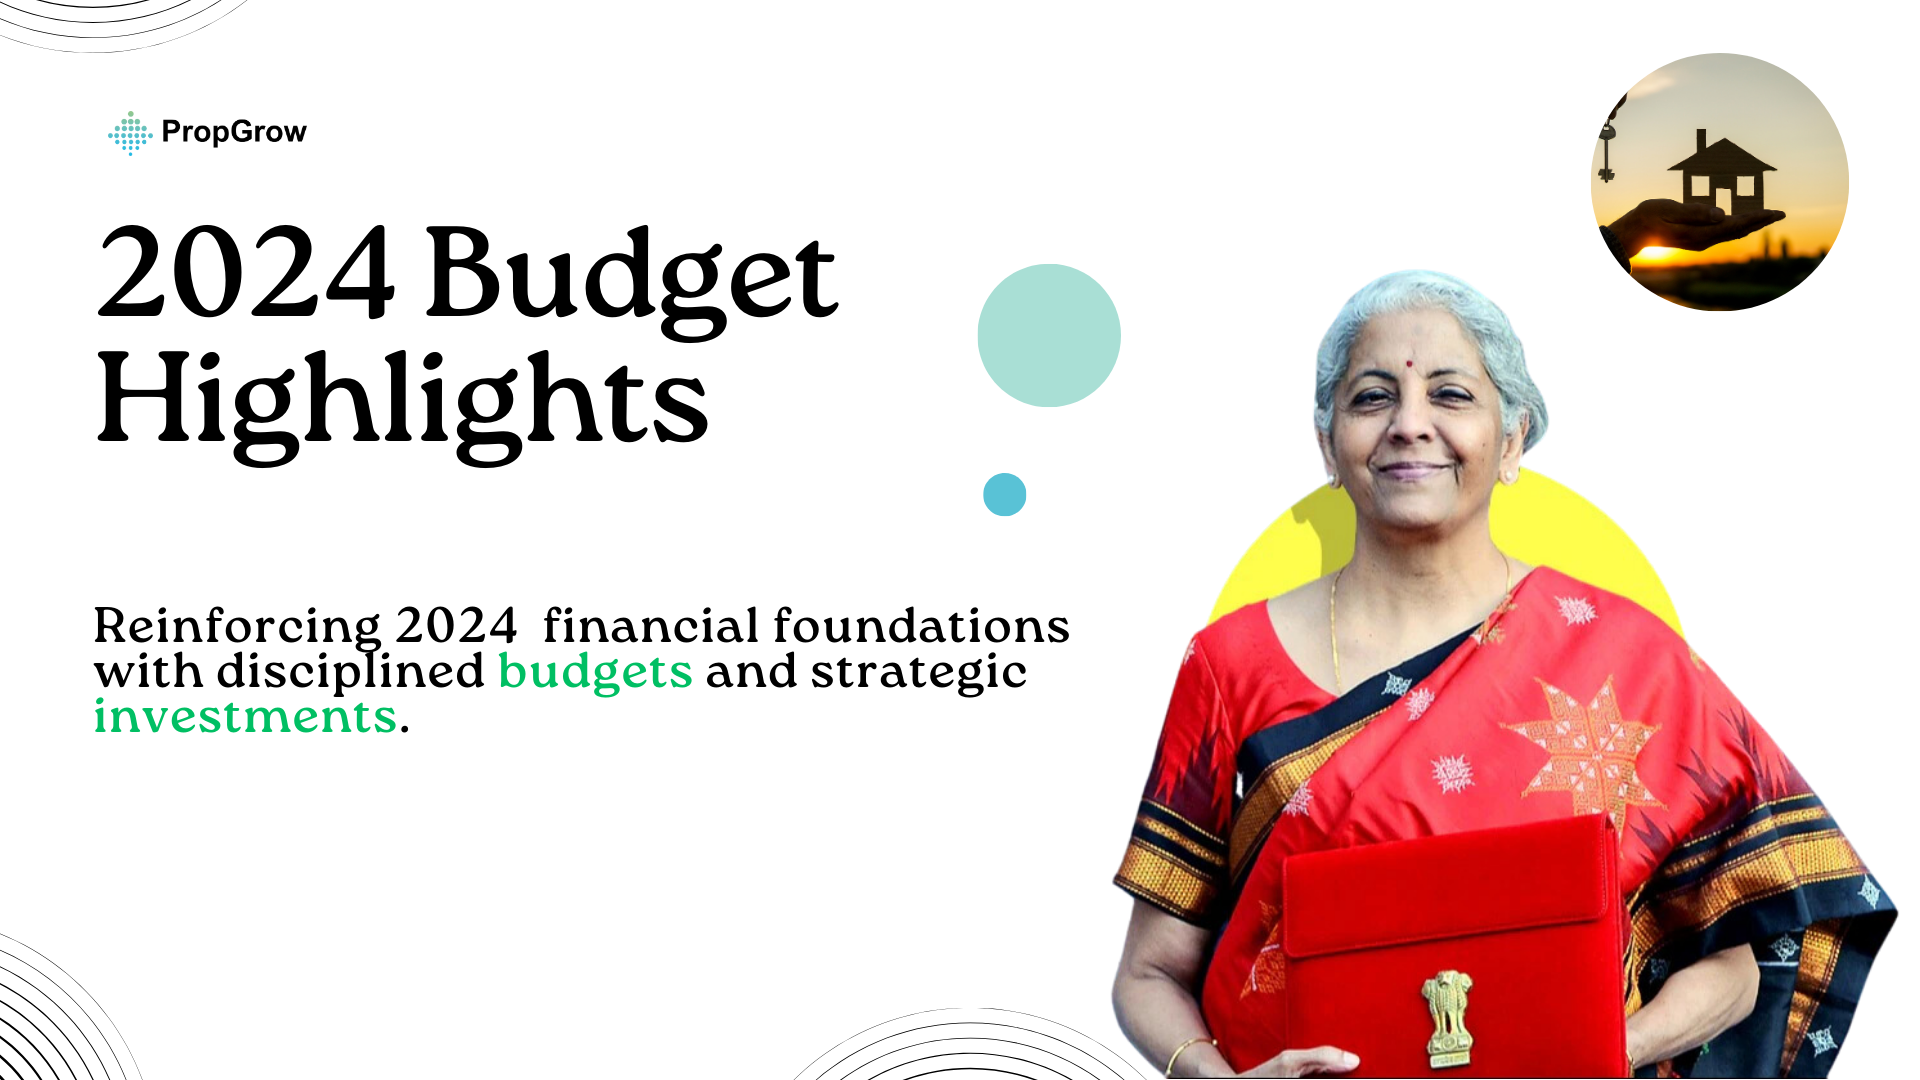 2024 Budget Highlights: Real estate expects budget boost